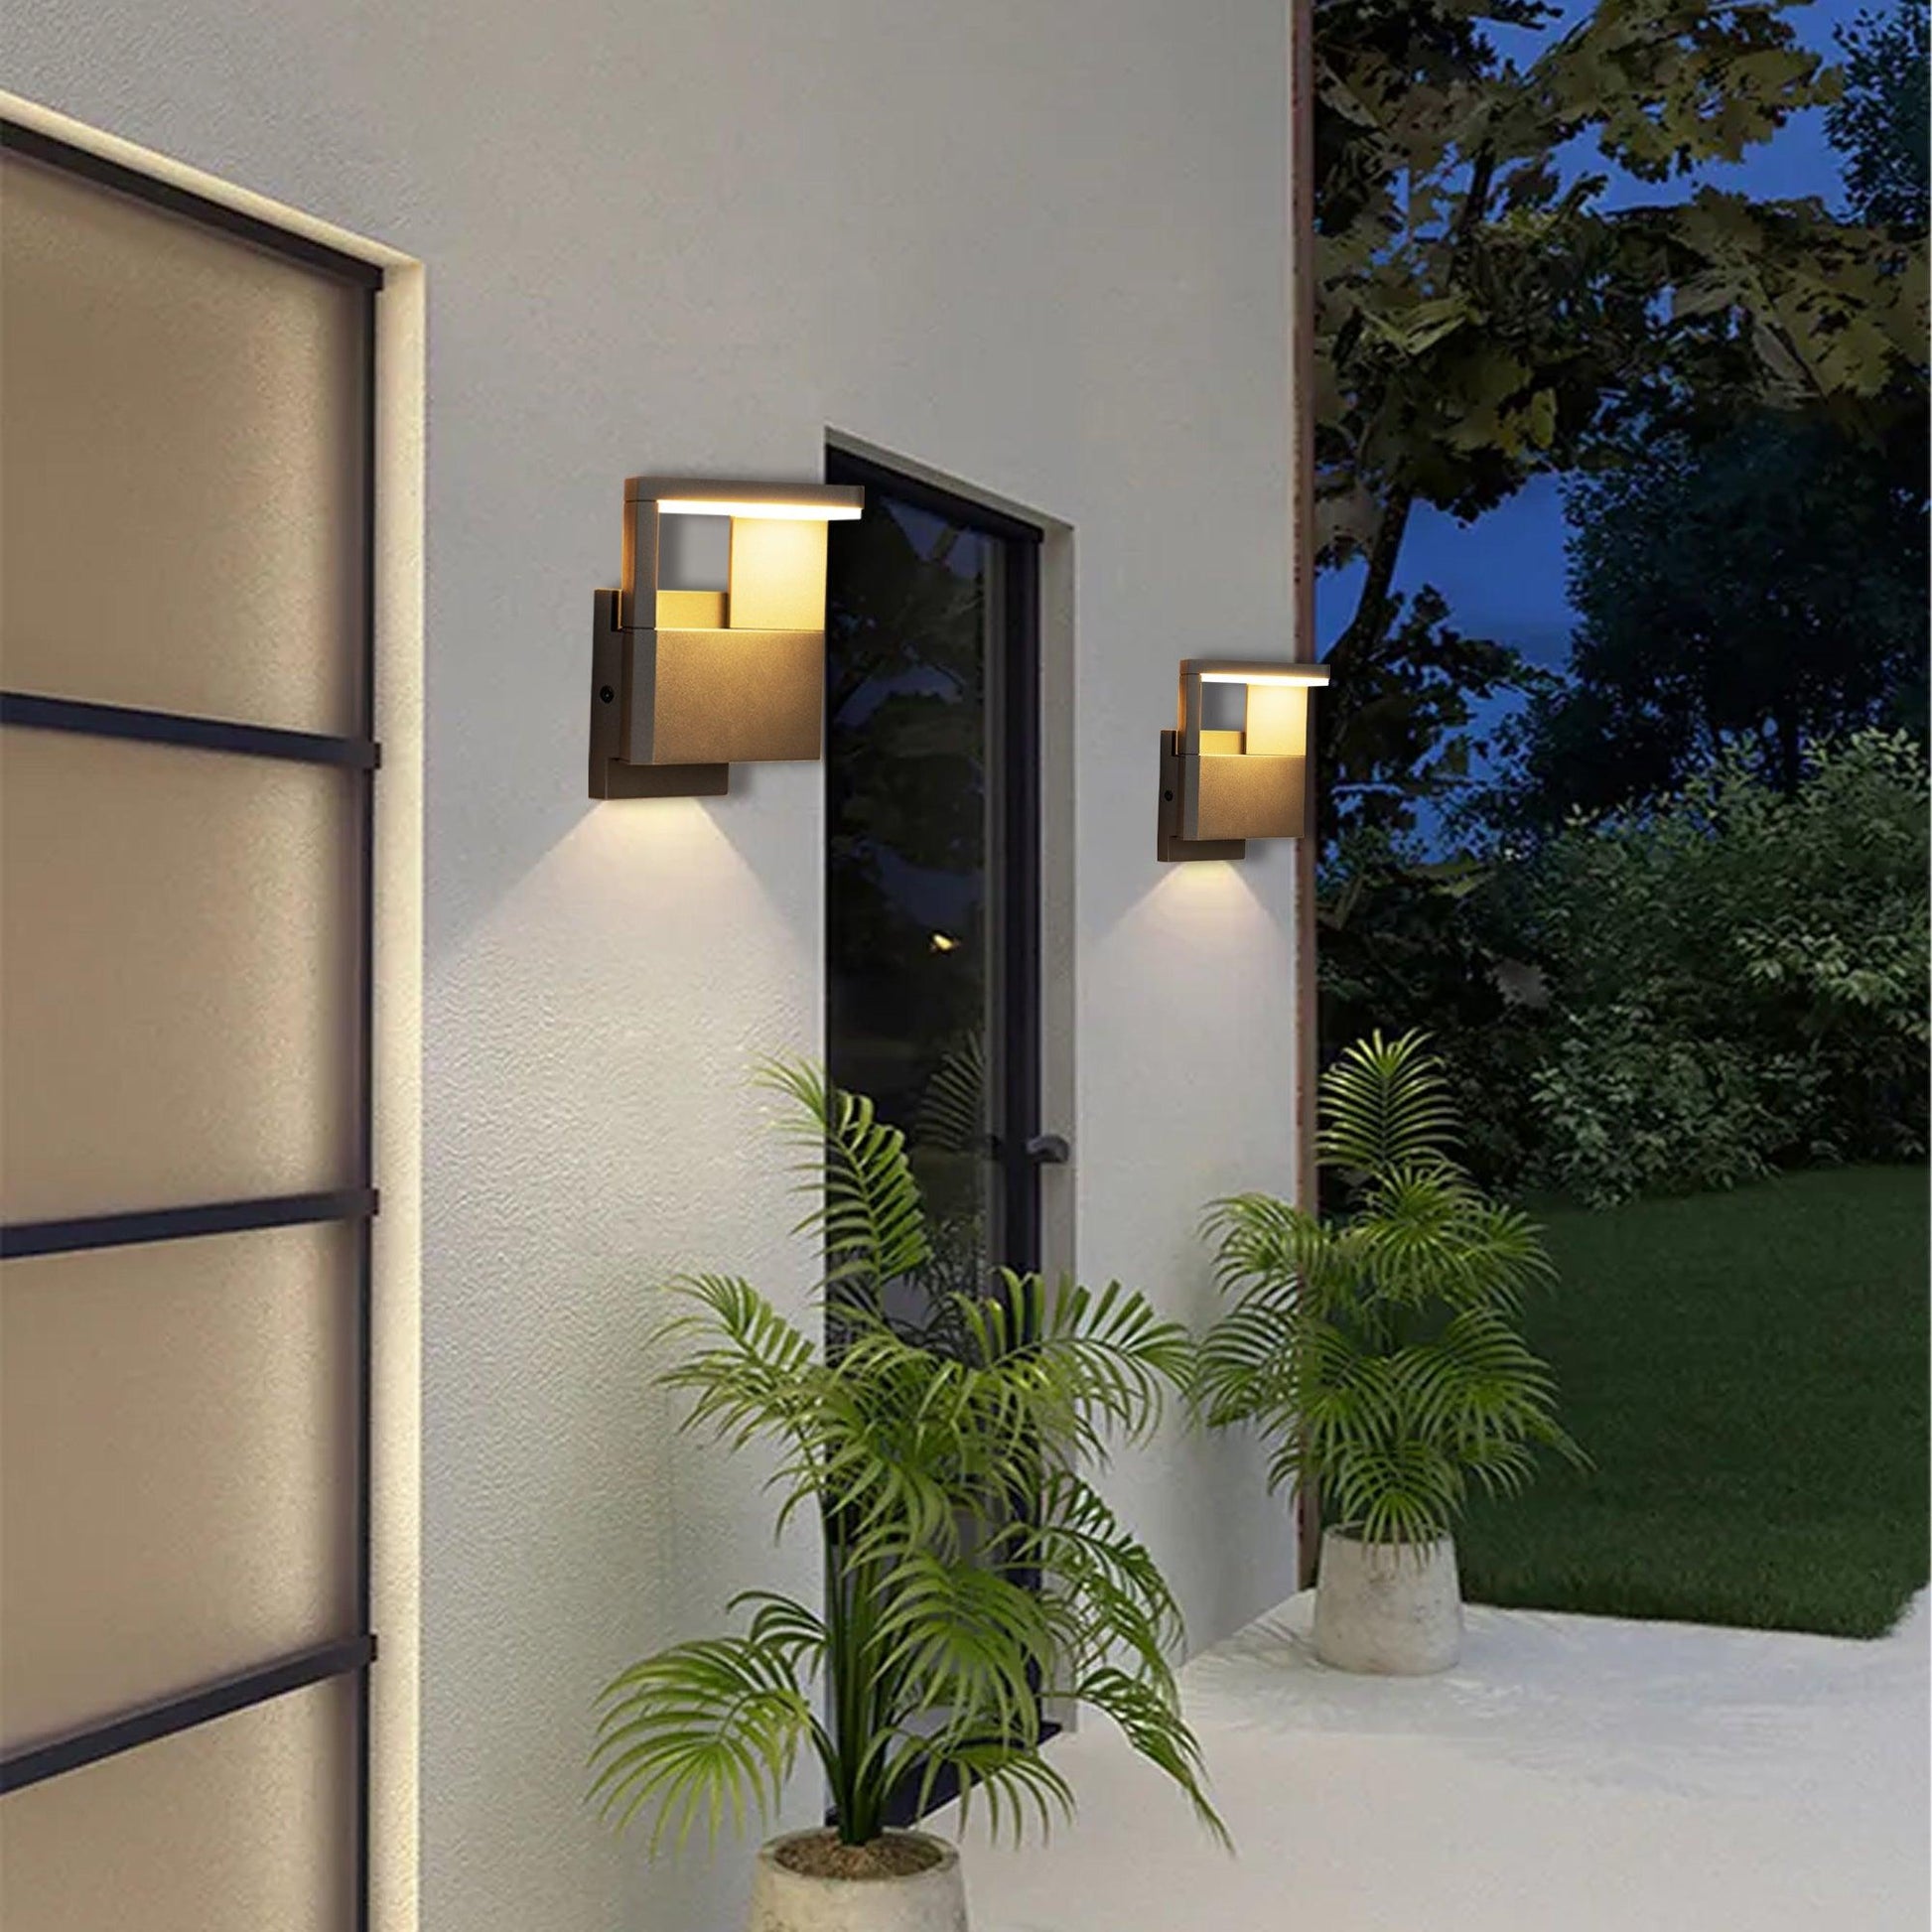 LazyPro Wall Light Outdoor LED Wall Mount Lamp Modern Wall Mount Sconce Lantern Fixture for Porch Front Door 2113 - Lazy Pro